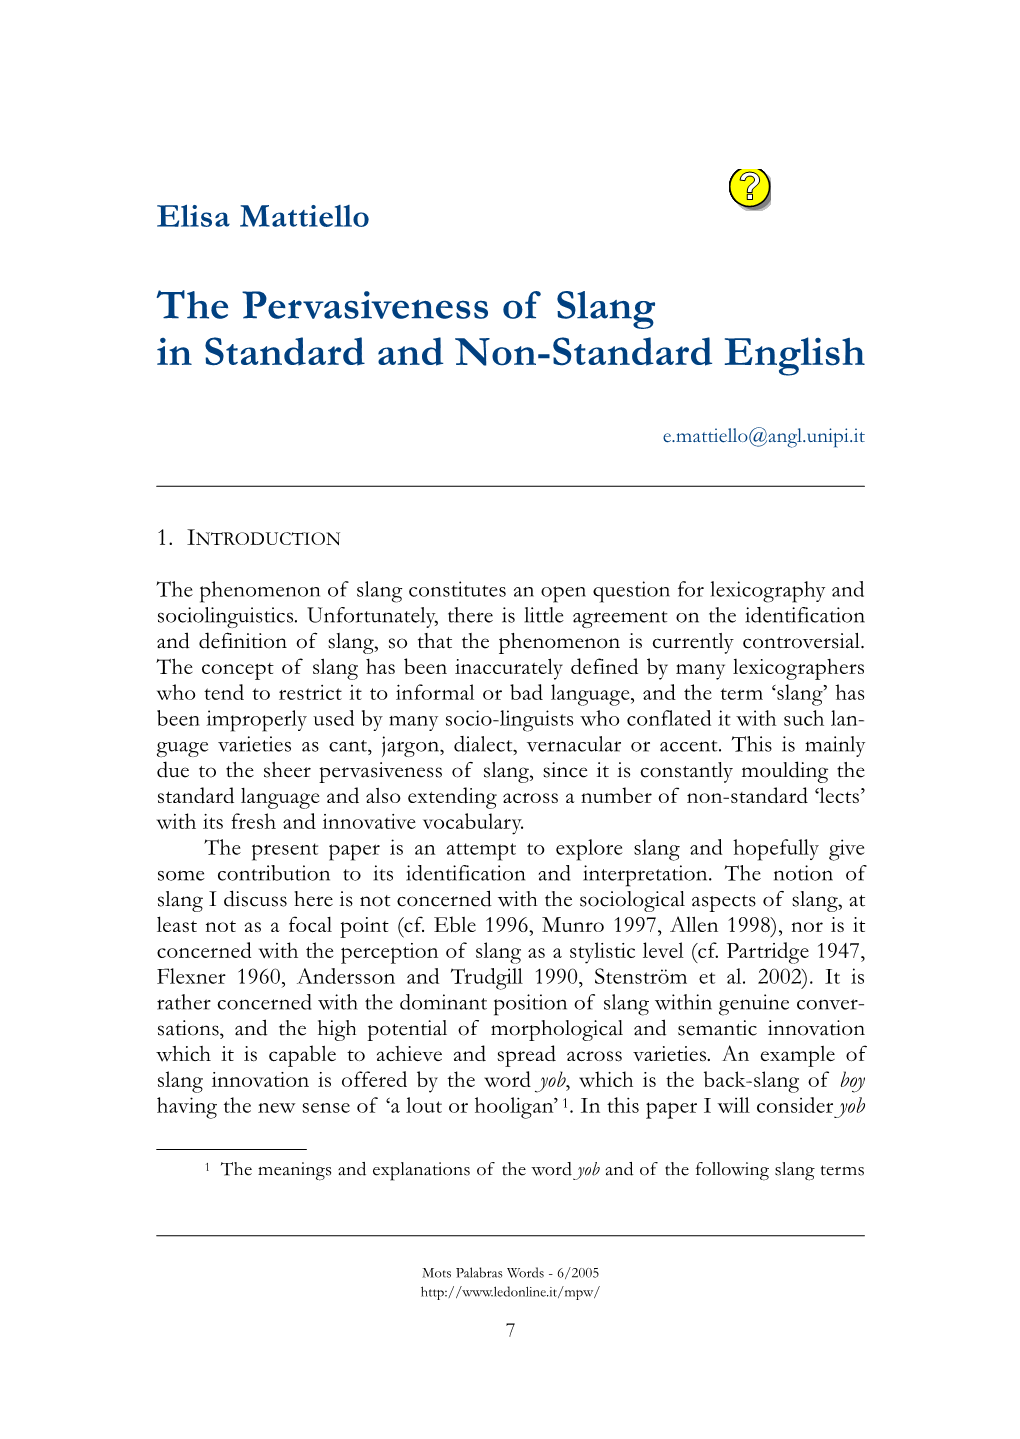 The Pervasiveness of Slang in Standard and Non-Standard English Ed Online Dictionaries and Such Paper Dictionaries of Slang As Partridge (1984) and Beale (Ed.) (1991)